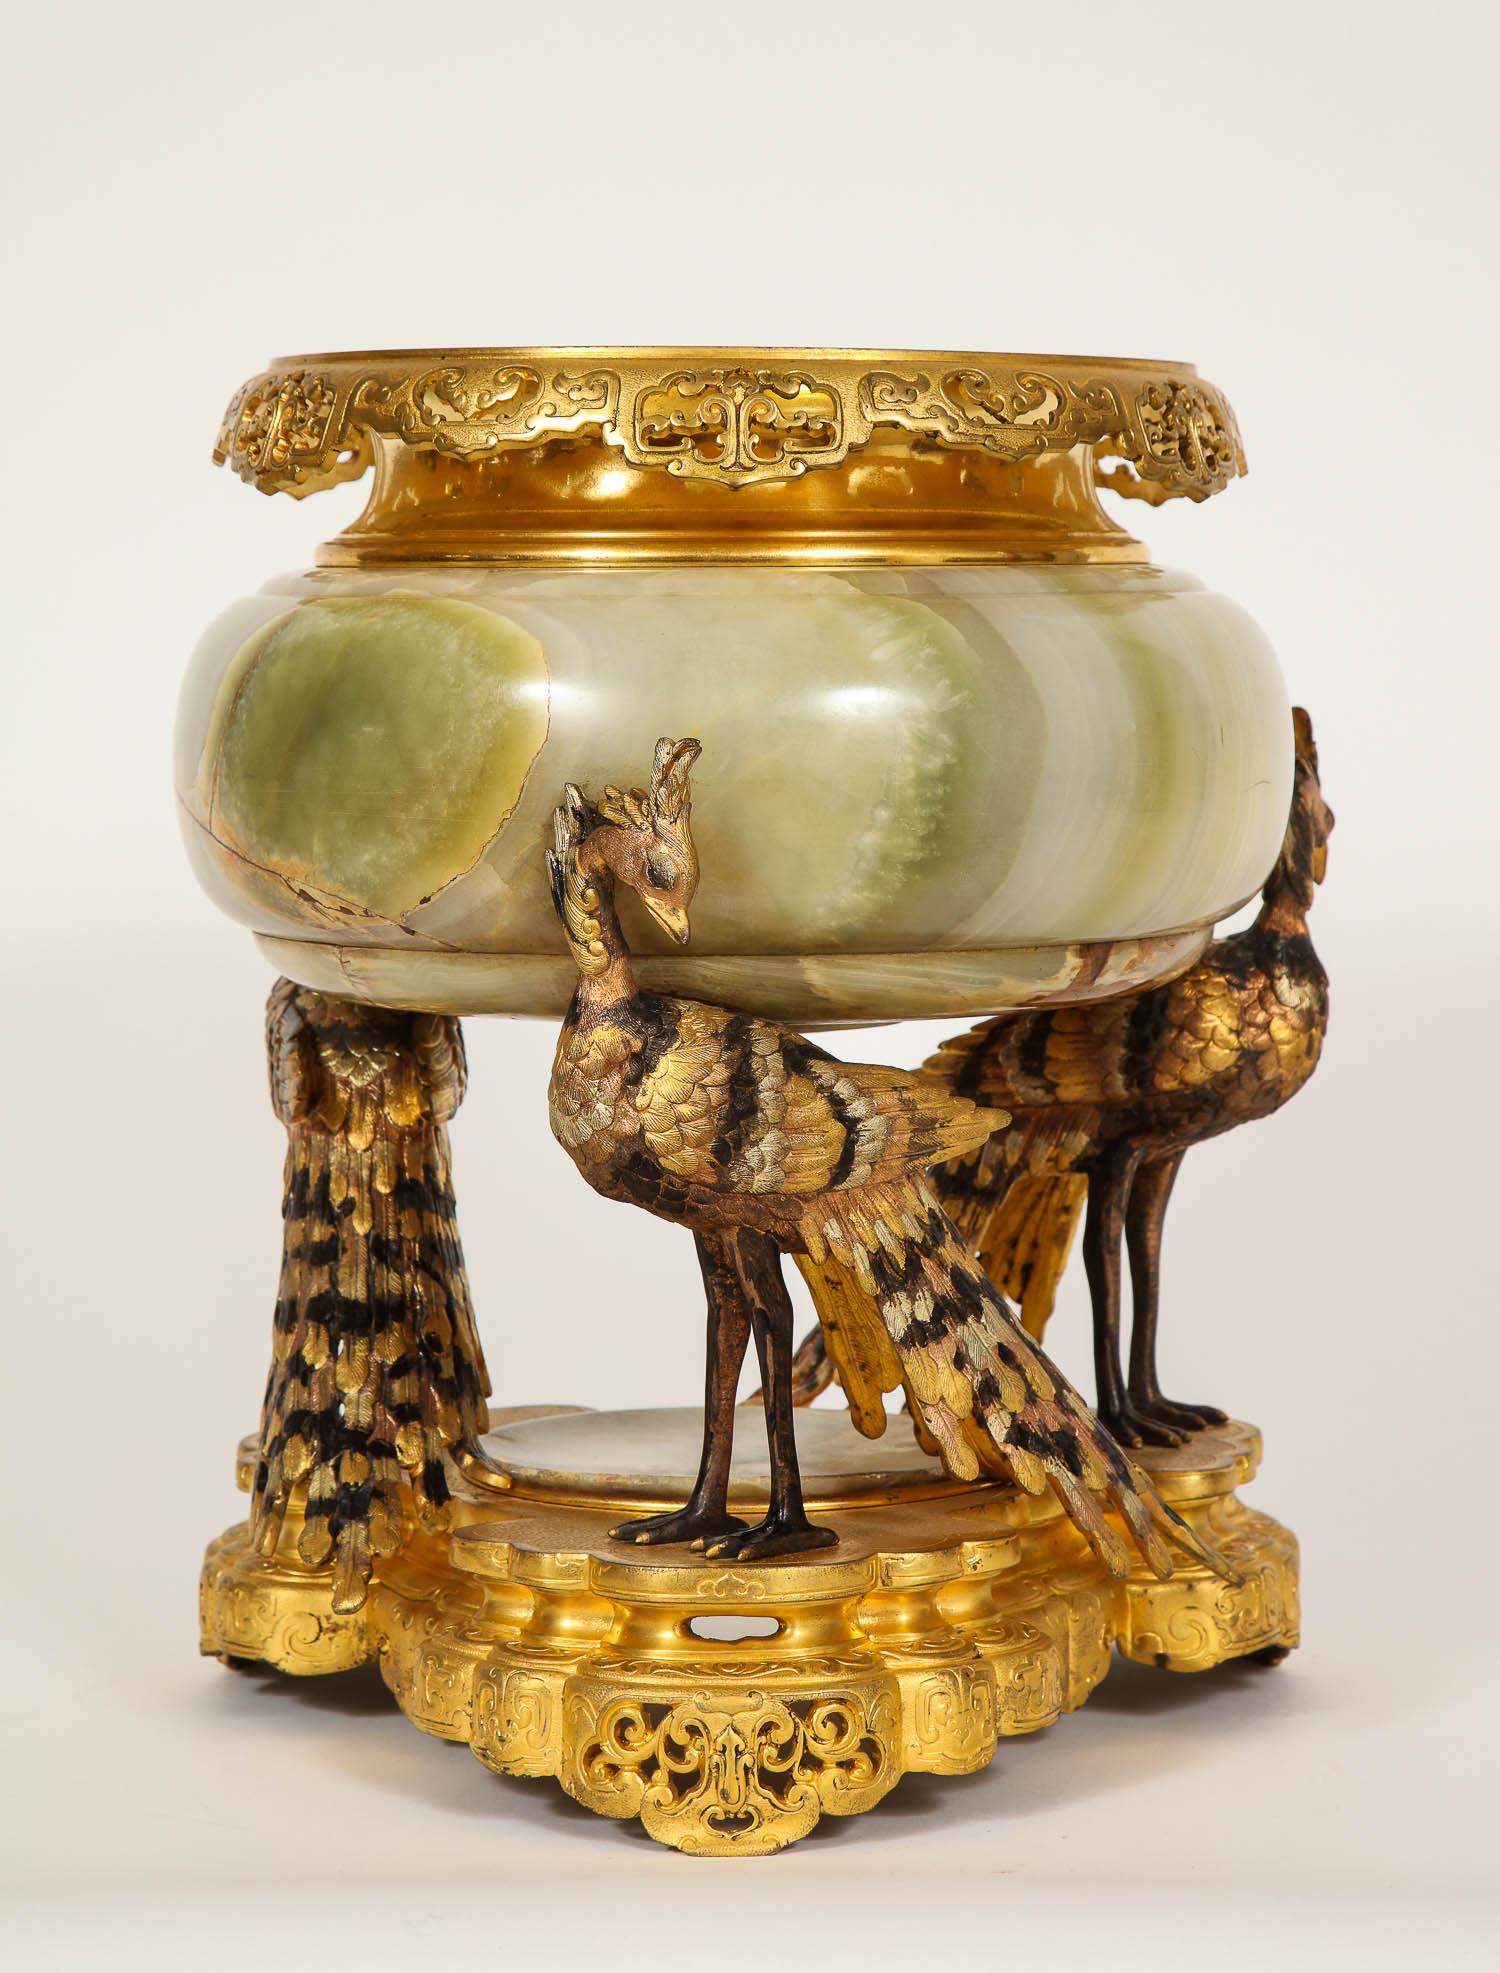 A beautiful French polychrome patinated dore bronze and silvered bronze with Algerian onyx mounted centerpiece, attributed to Eugene Cornu. This beautiful centerpiece was made in the 